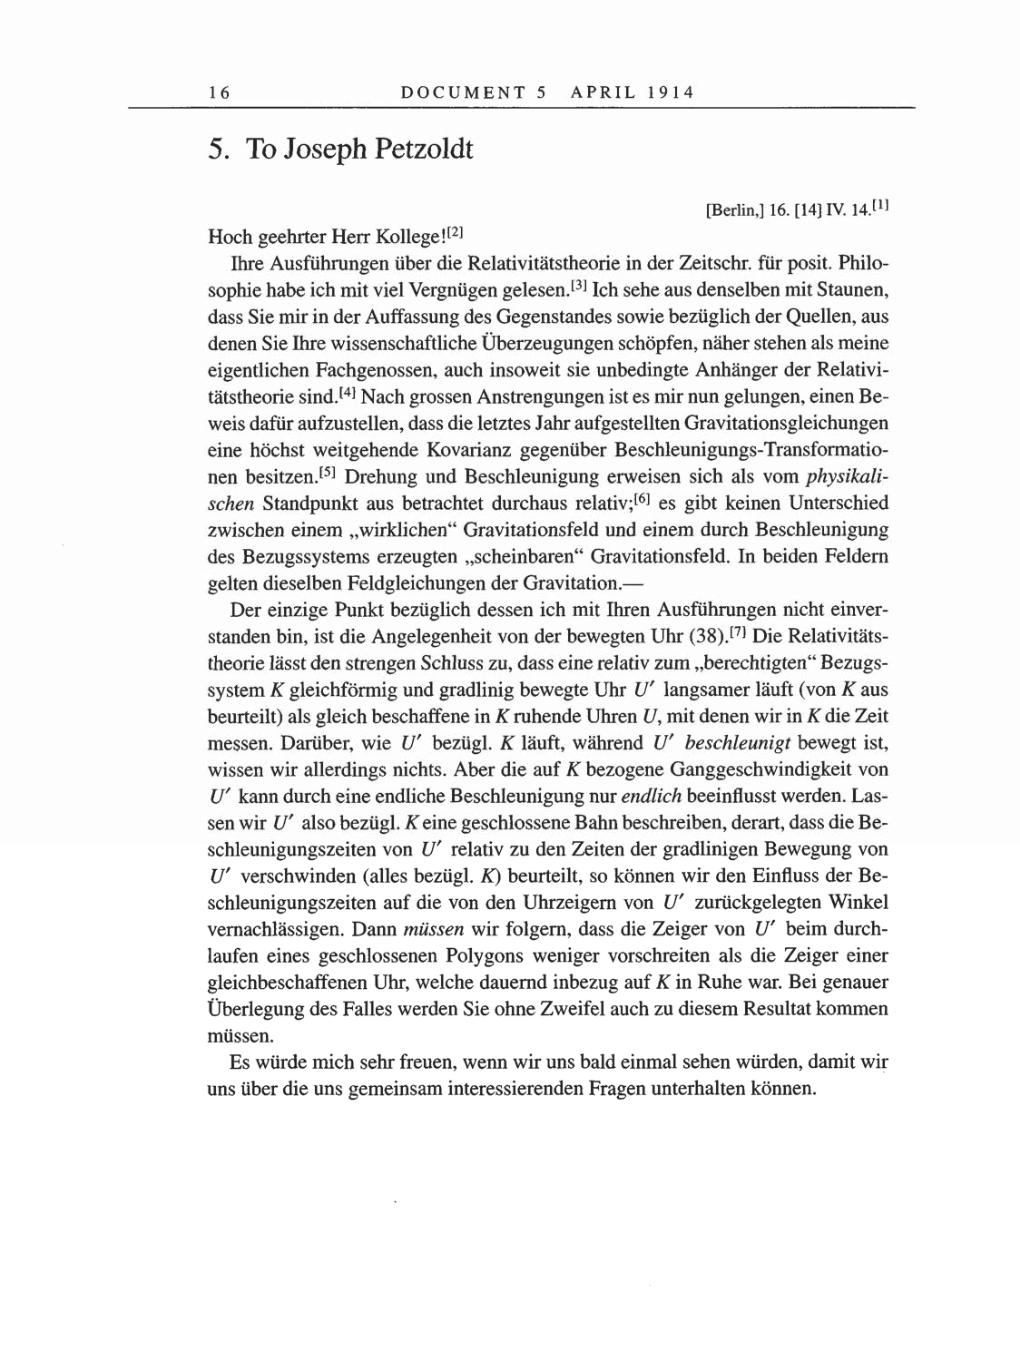 Volume 8, Part A: The Berlin Years: Correspondence 1914-1917 page 16